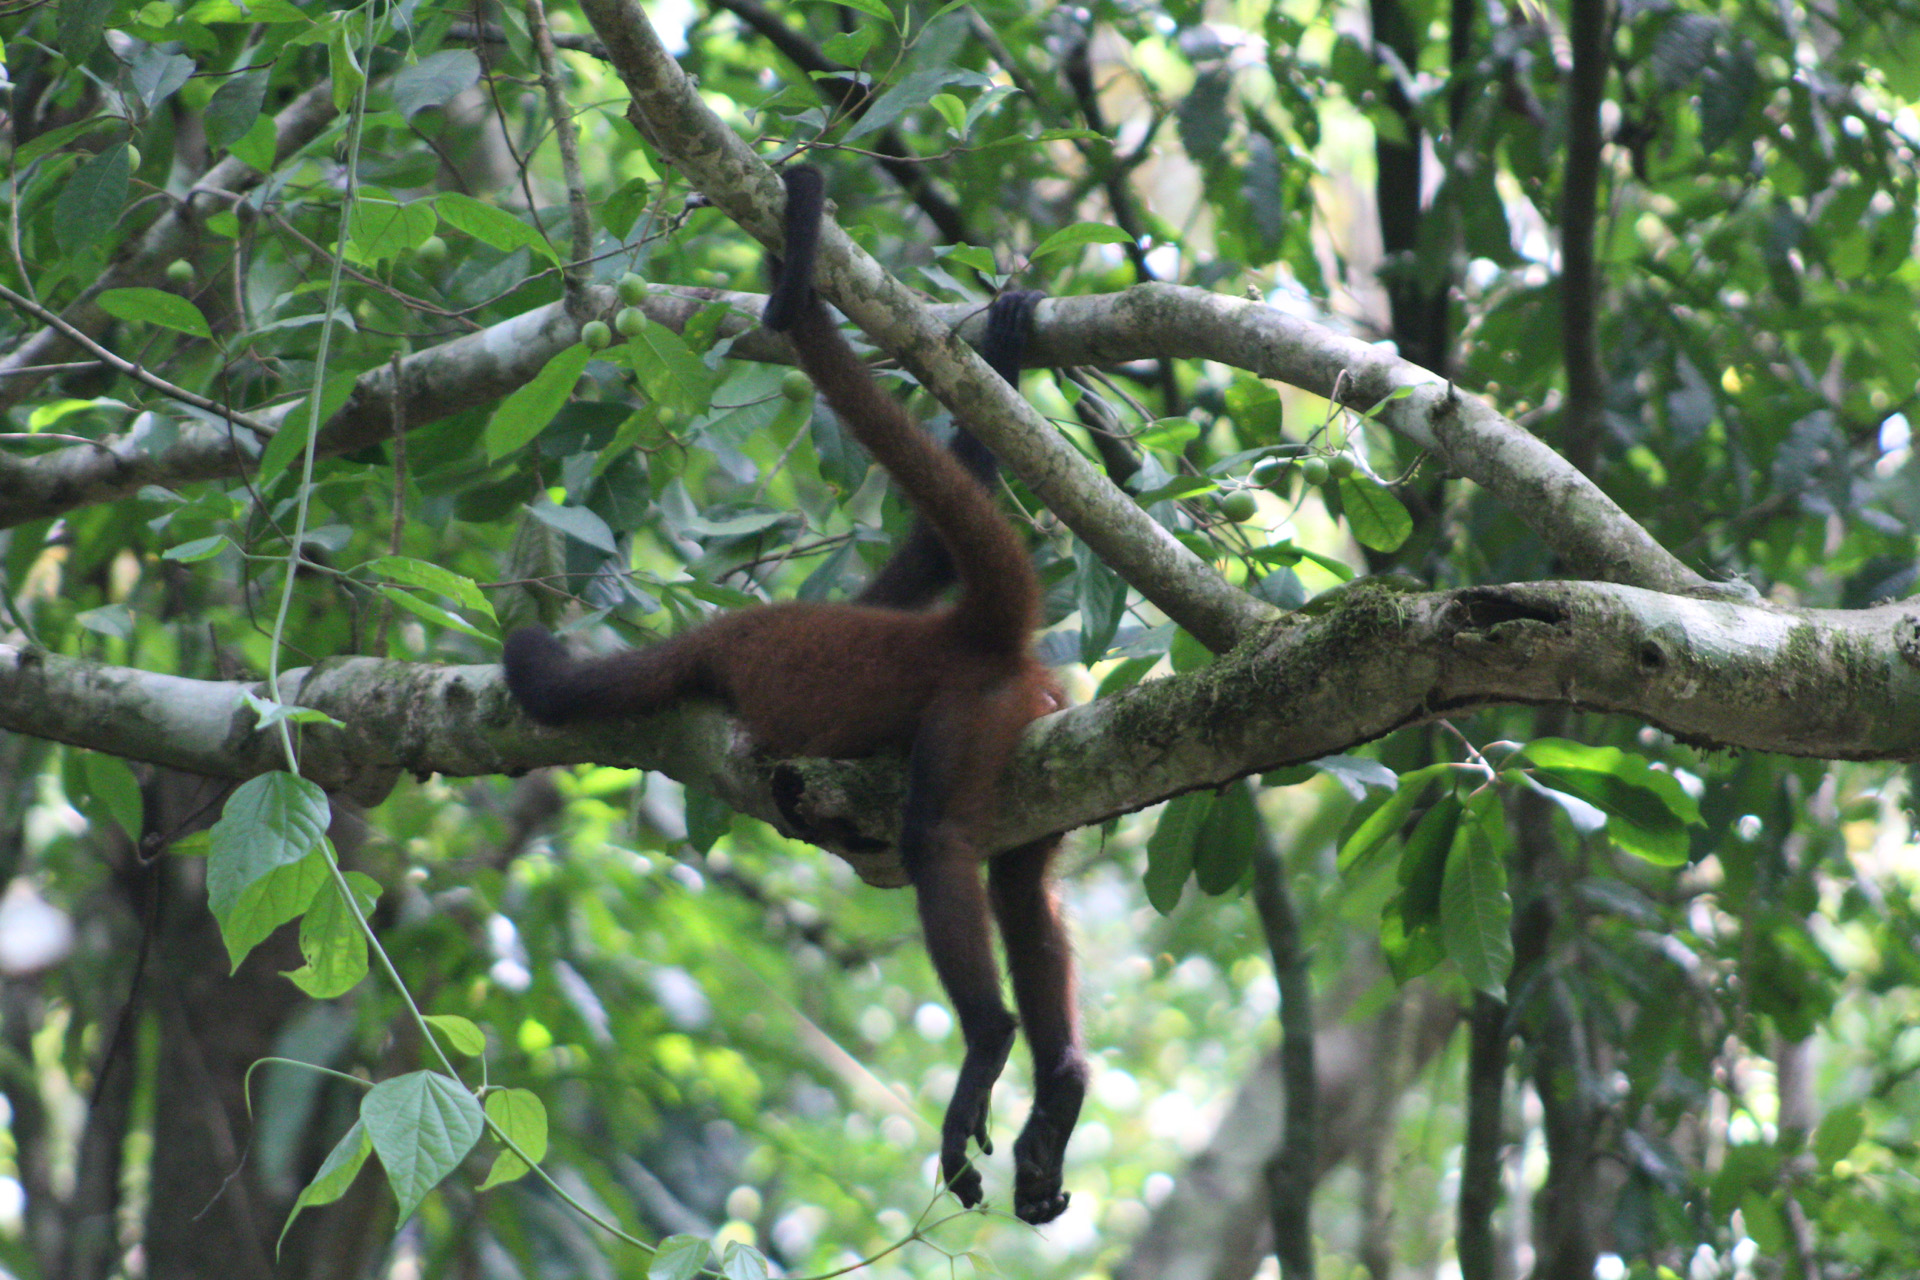 Spider Monkey taking a nap in Corcovado National Park on the Osa Peninsula, a rich biodiversity hotspot containing 5% of the world's biodiversity